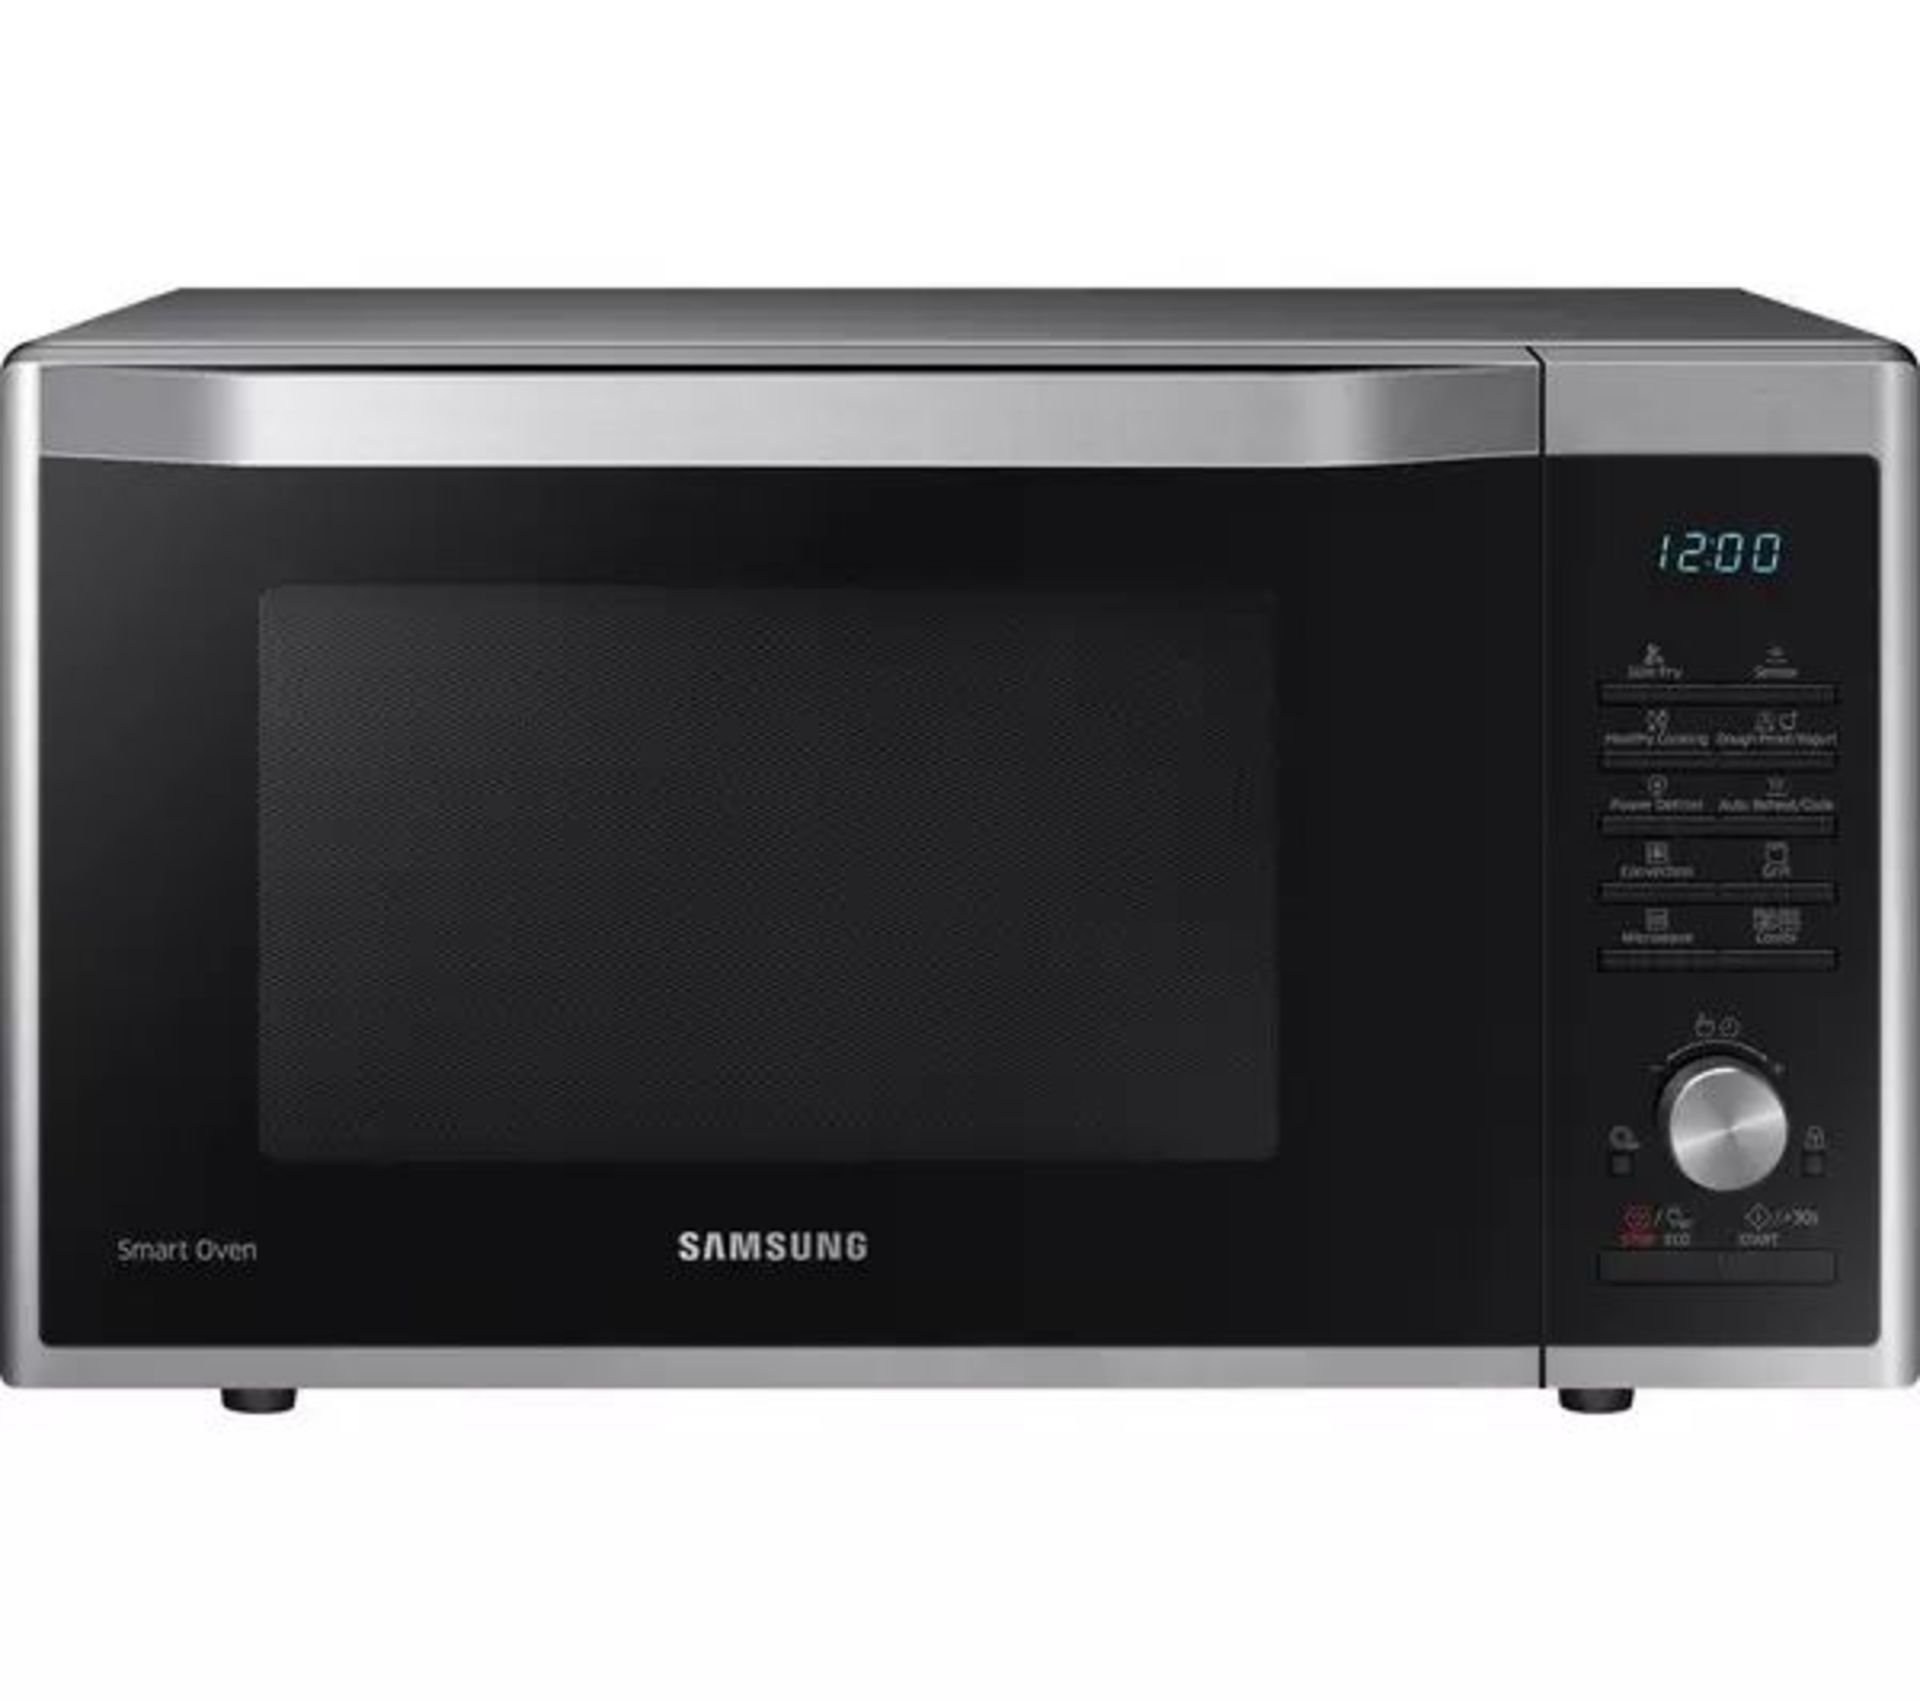 SAMSUNG MC32J7055CT Combination Microwave - Stainless Steel. - BW. RRP £409.00. The wide grill means